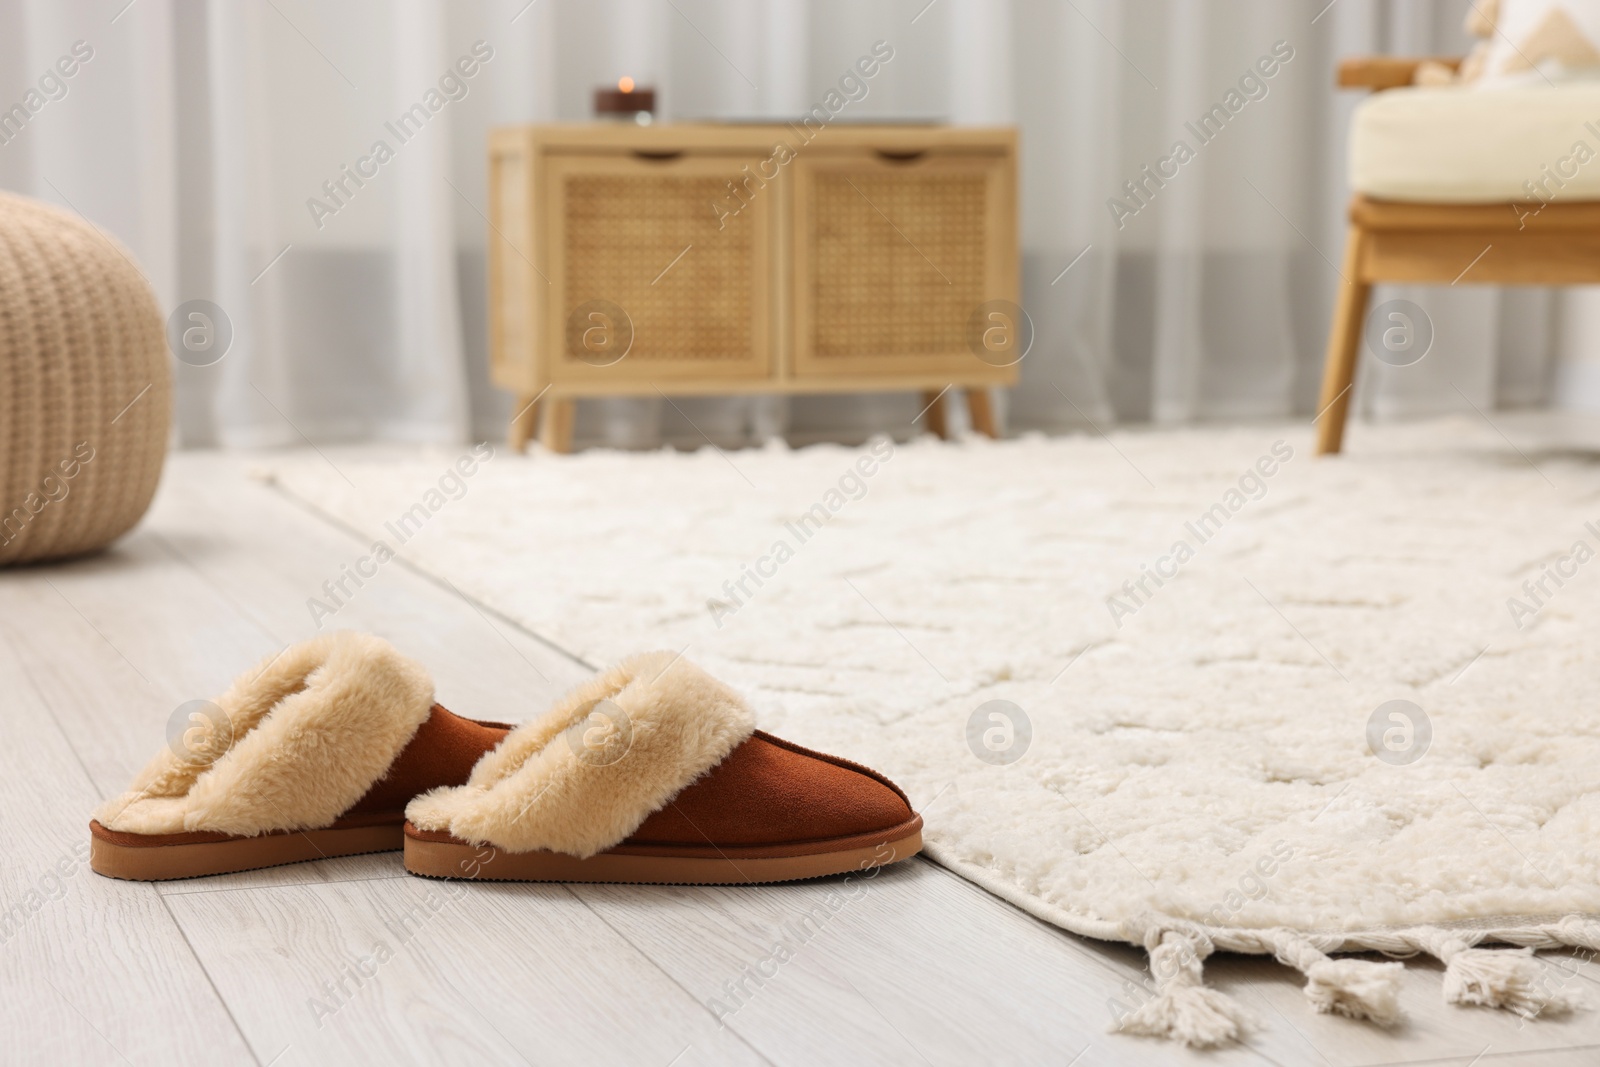 Photo of Slippers near soft white carpet in living room. Space for text